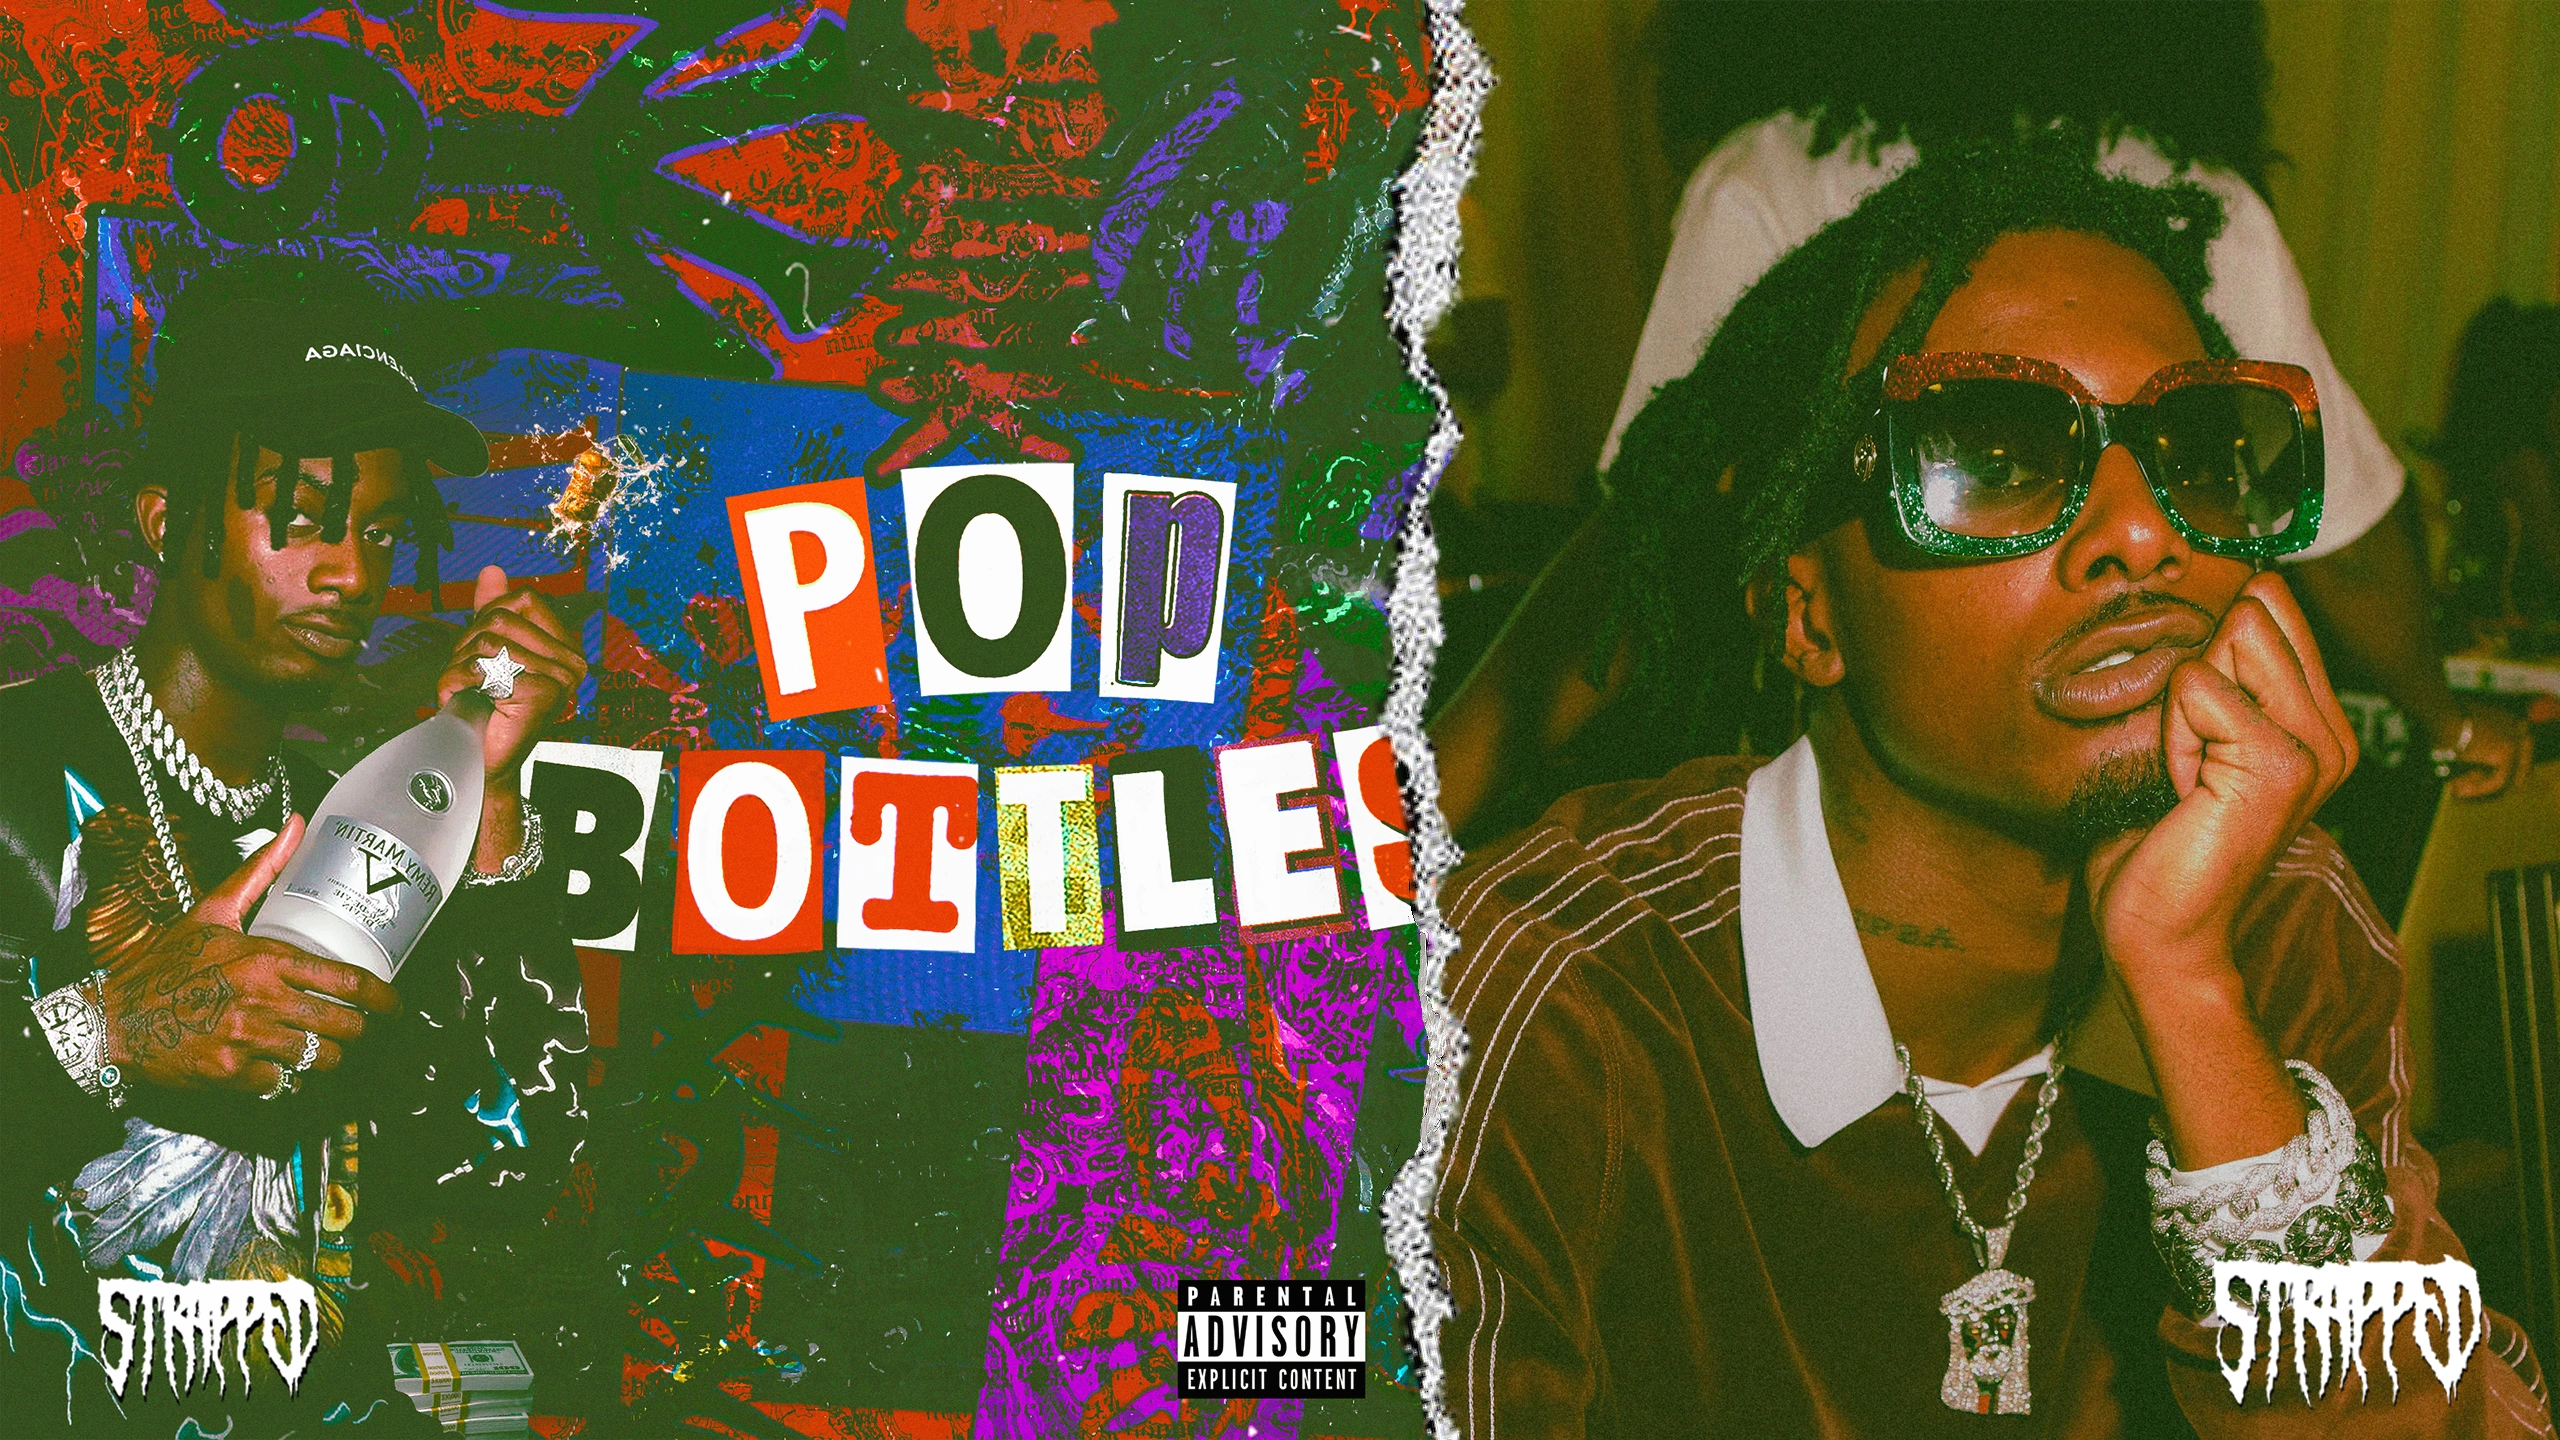 Playboi Carti's highly anticipated "Pop Bottles" emerges online